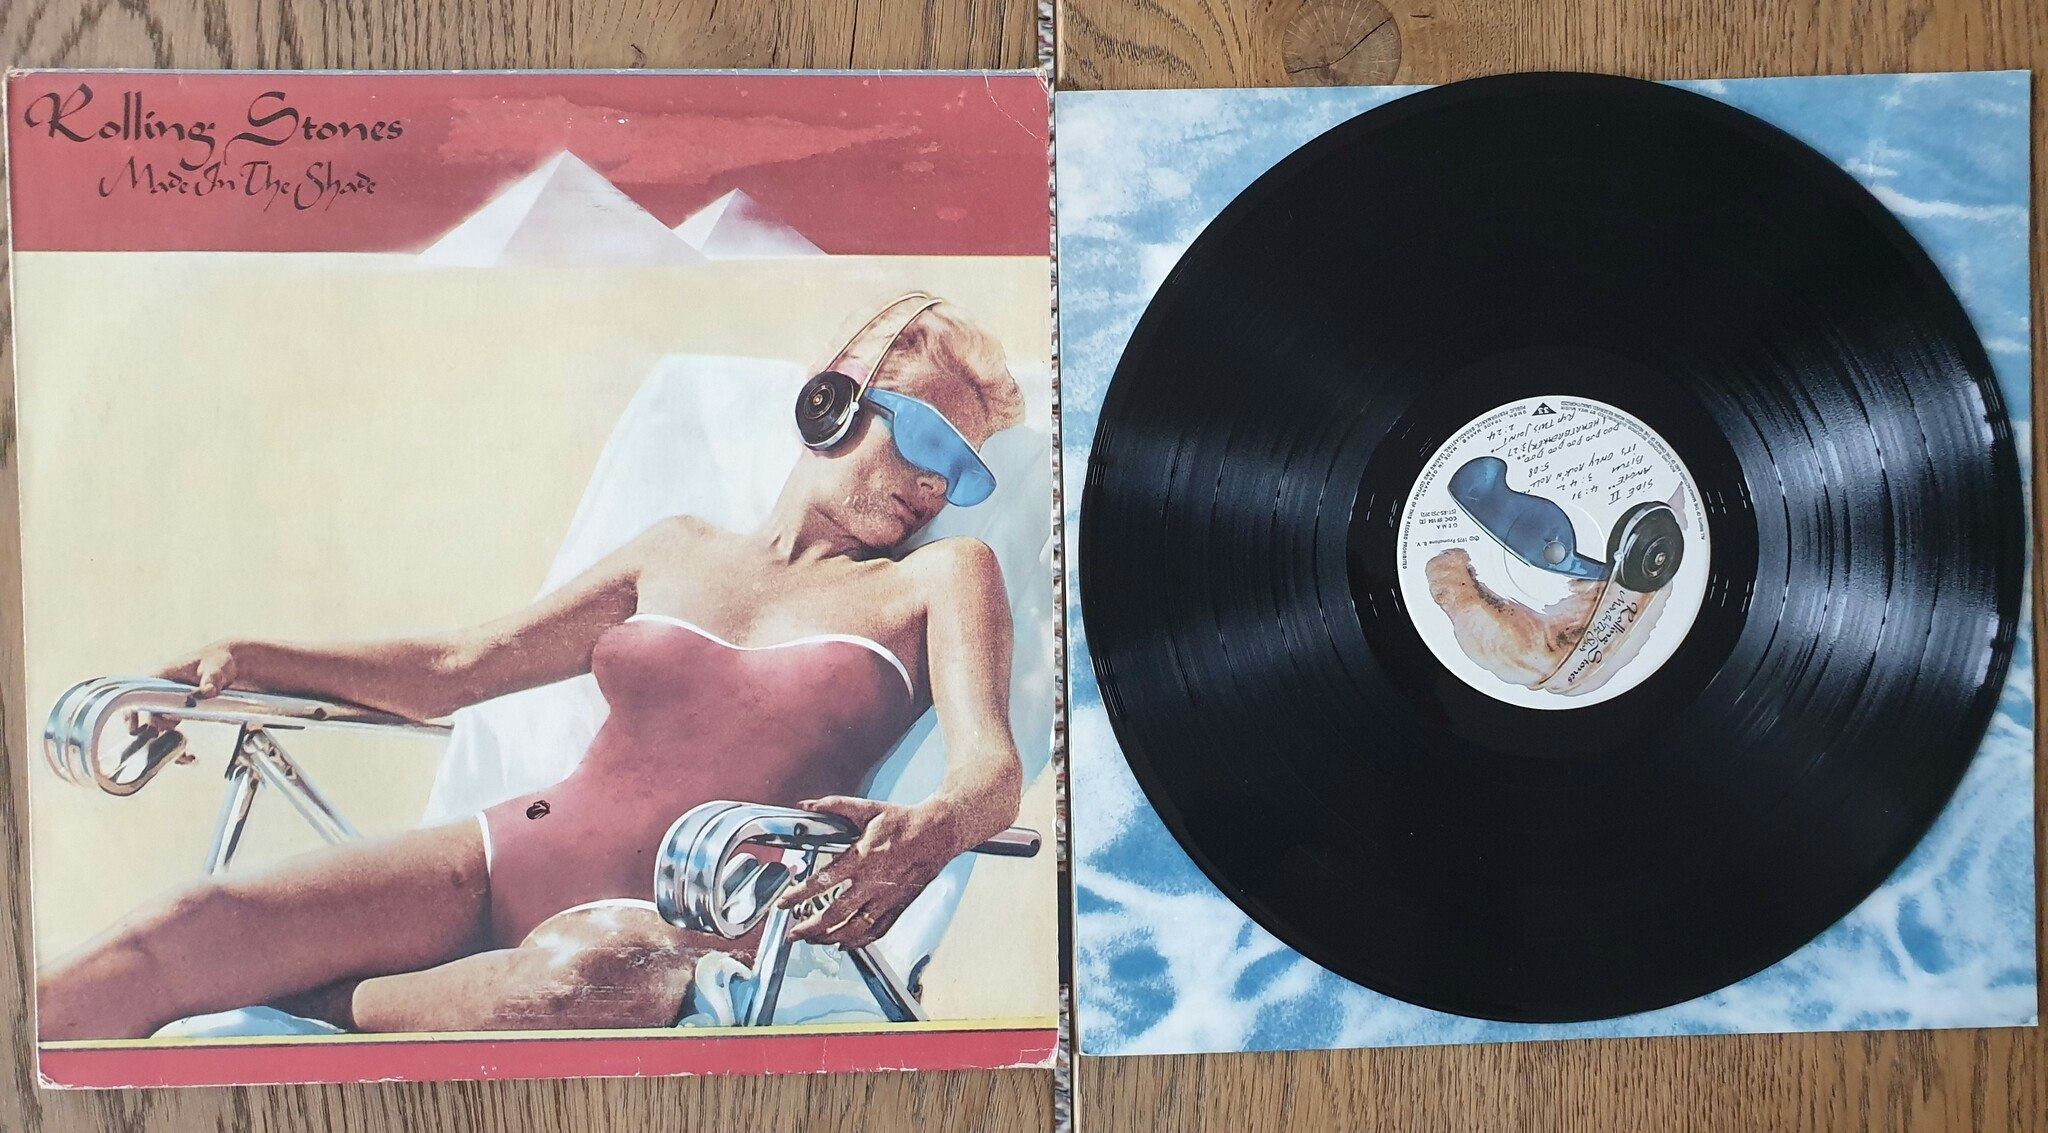 The Rolling Stones, Made in the shade. Vinyl LP